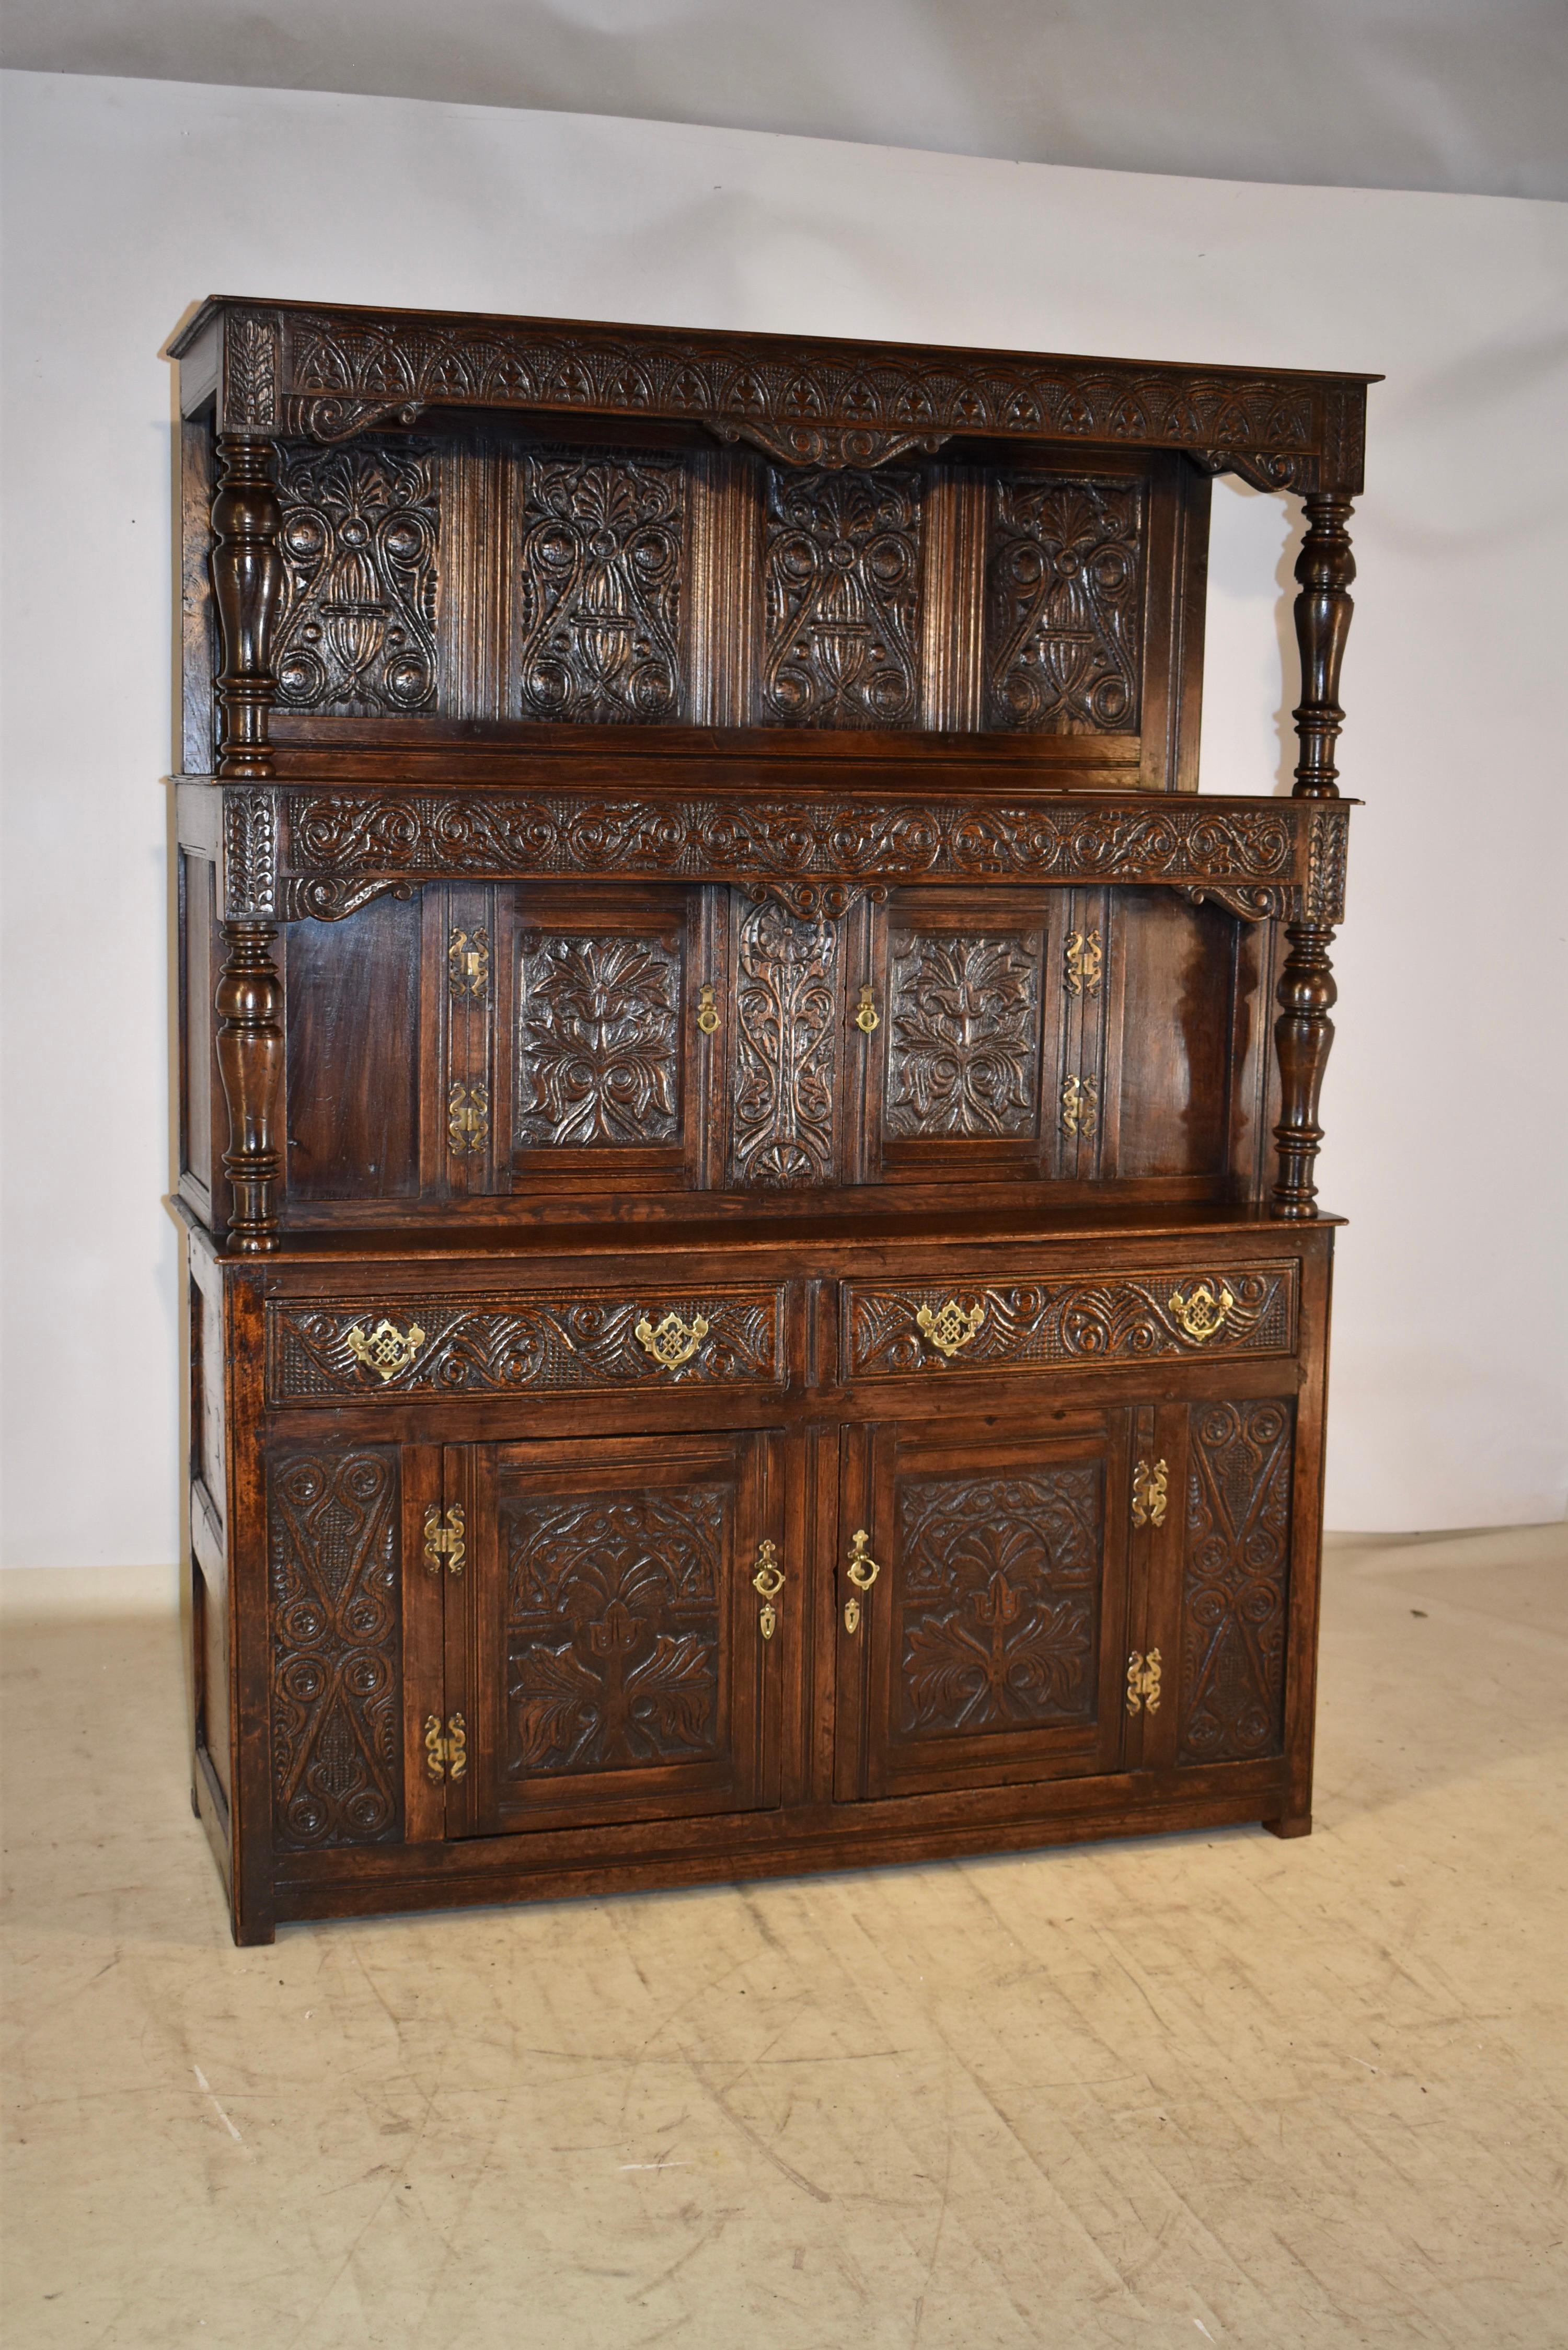 Very unusual early 18th century tridarn press cupboard from England.  This piece is truly wonderful.  It is unusual in that it has two shelves instead of just one, so it has triple tiers, which is much more stately and gives it some additional